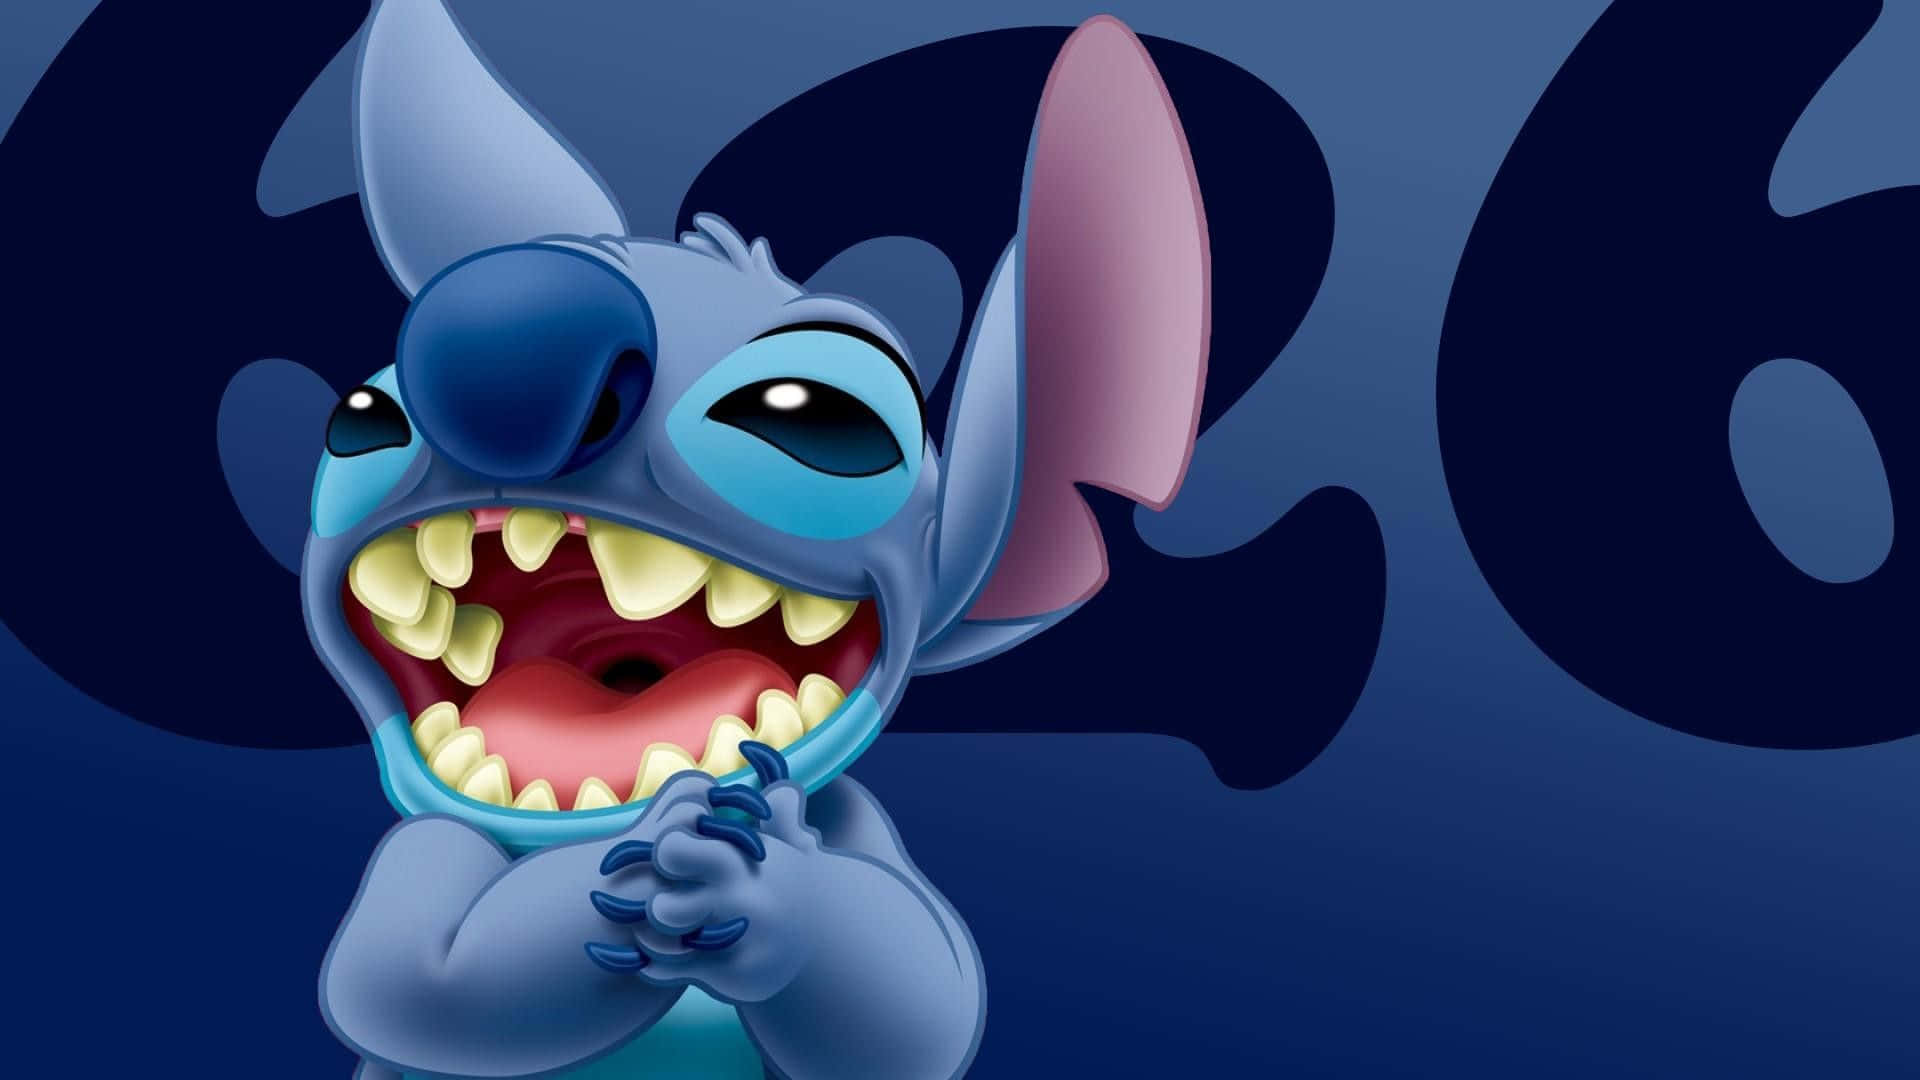 Cute Baby Stitch Smiling Wallpaper